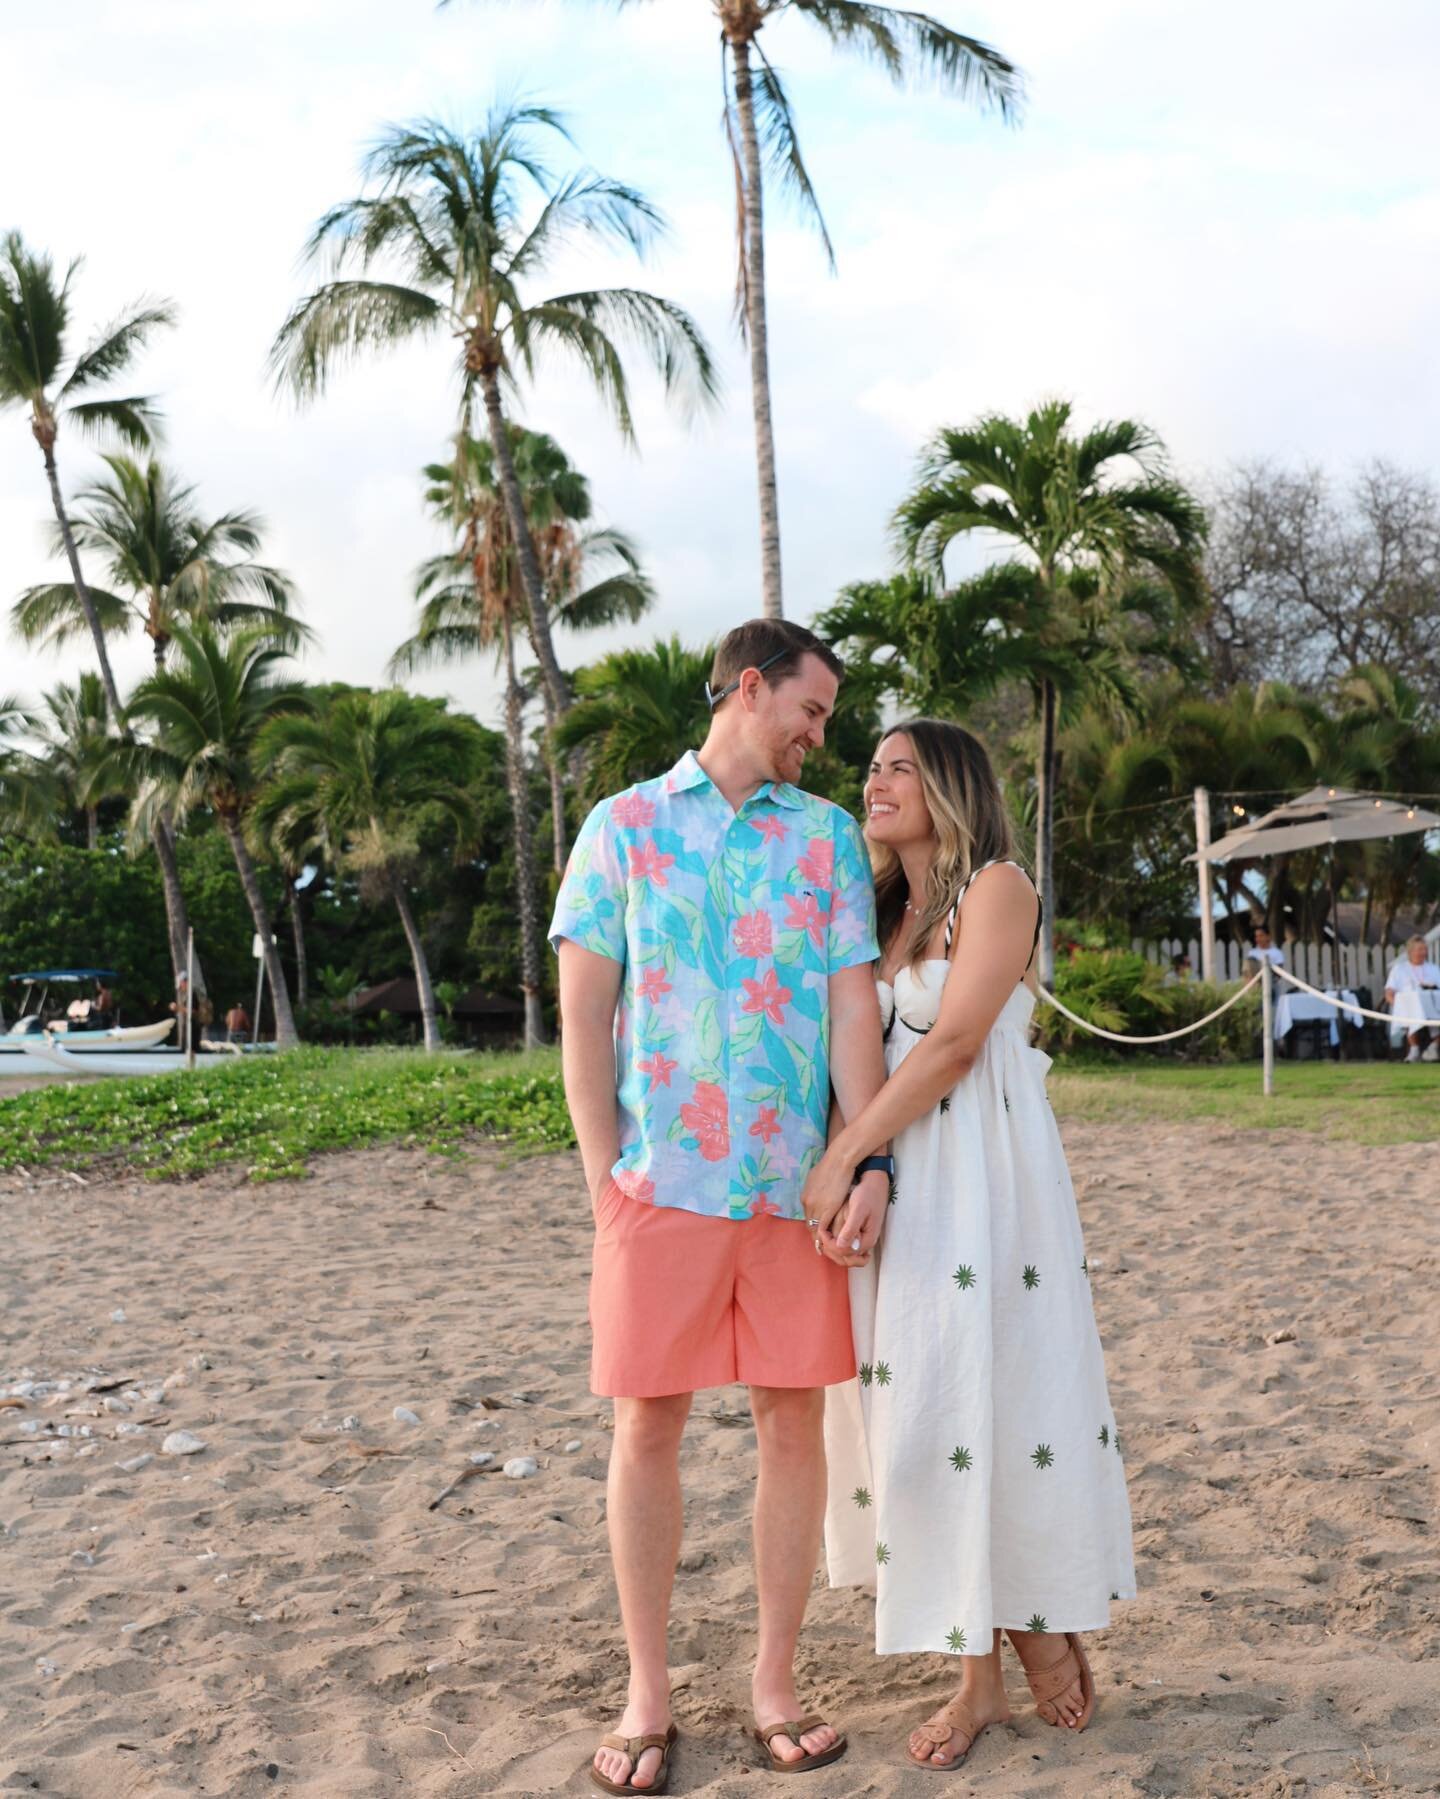 All the #alohafriday vibes🌴 
PS - swipe for a now &amp; then 🥰❤️ so much life has happened over the last five years 💍🐶🐘🏡 grateful to have this guy by my side for all of it 
.
#maui #vacay #palmtrees #aloha #hawaii #travelgram #ancoraswimwear